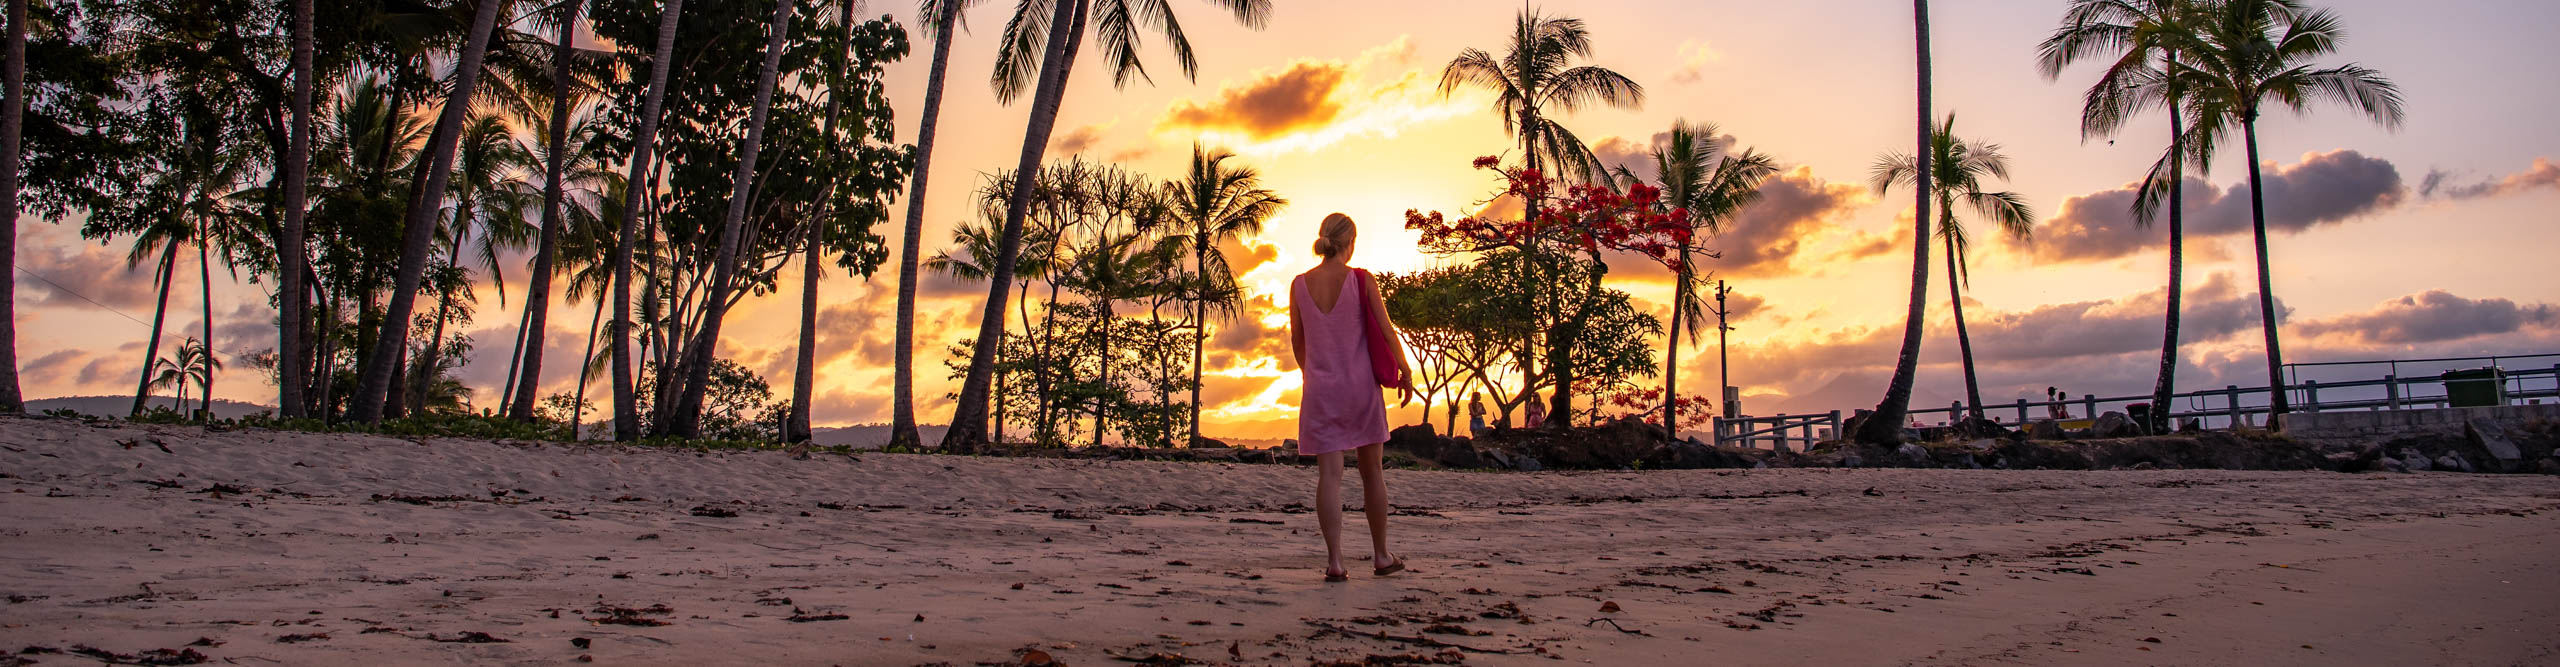 Woman walking along the beach with palm trees in Port Douglas at sunset 